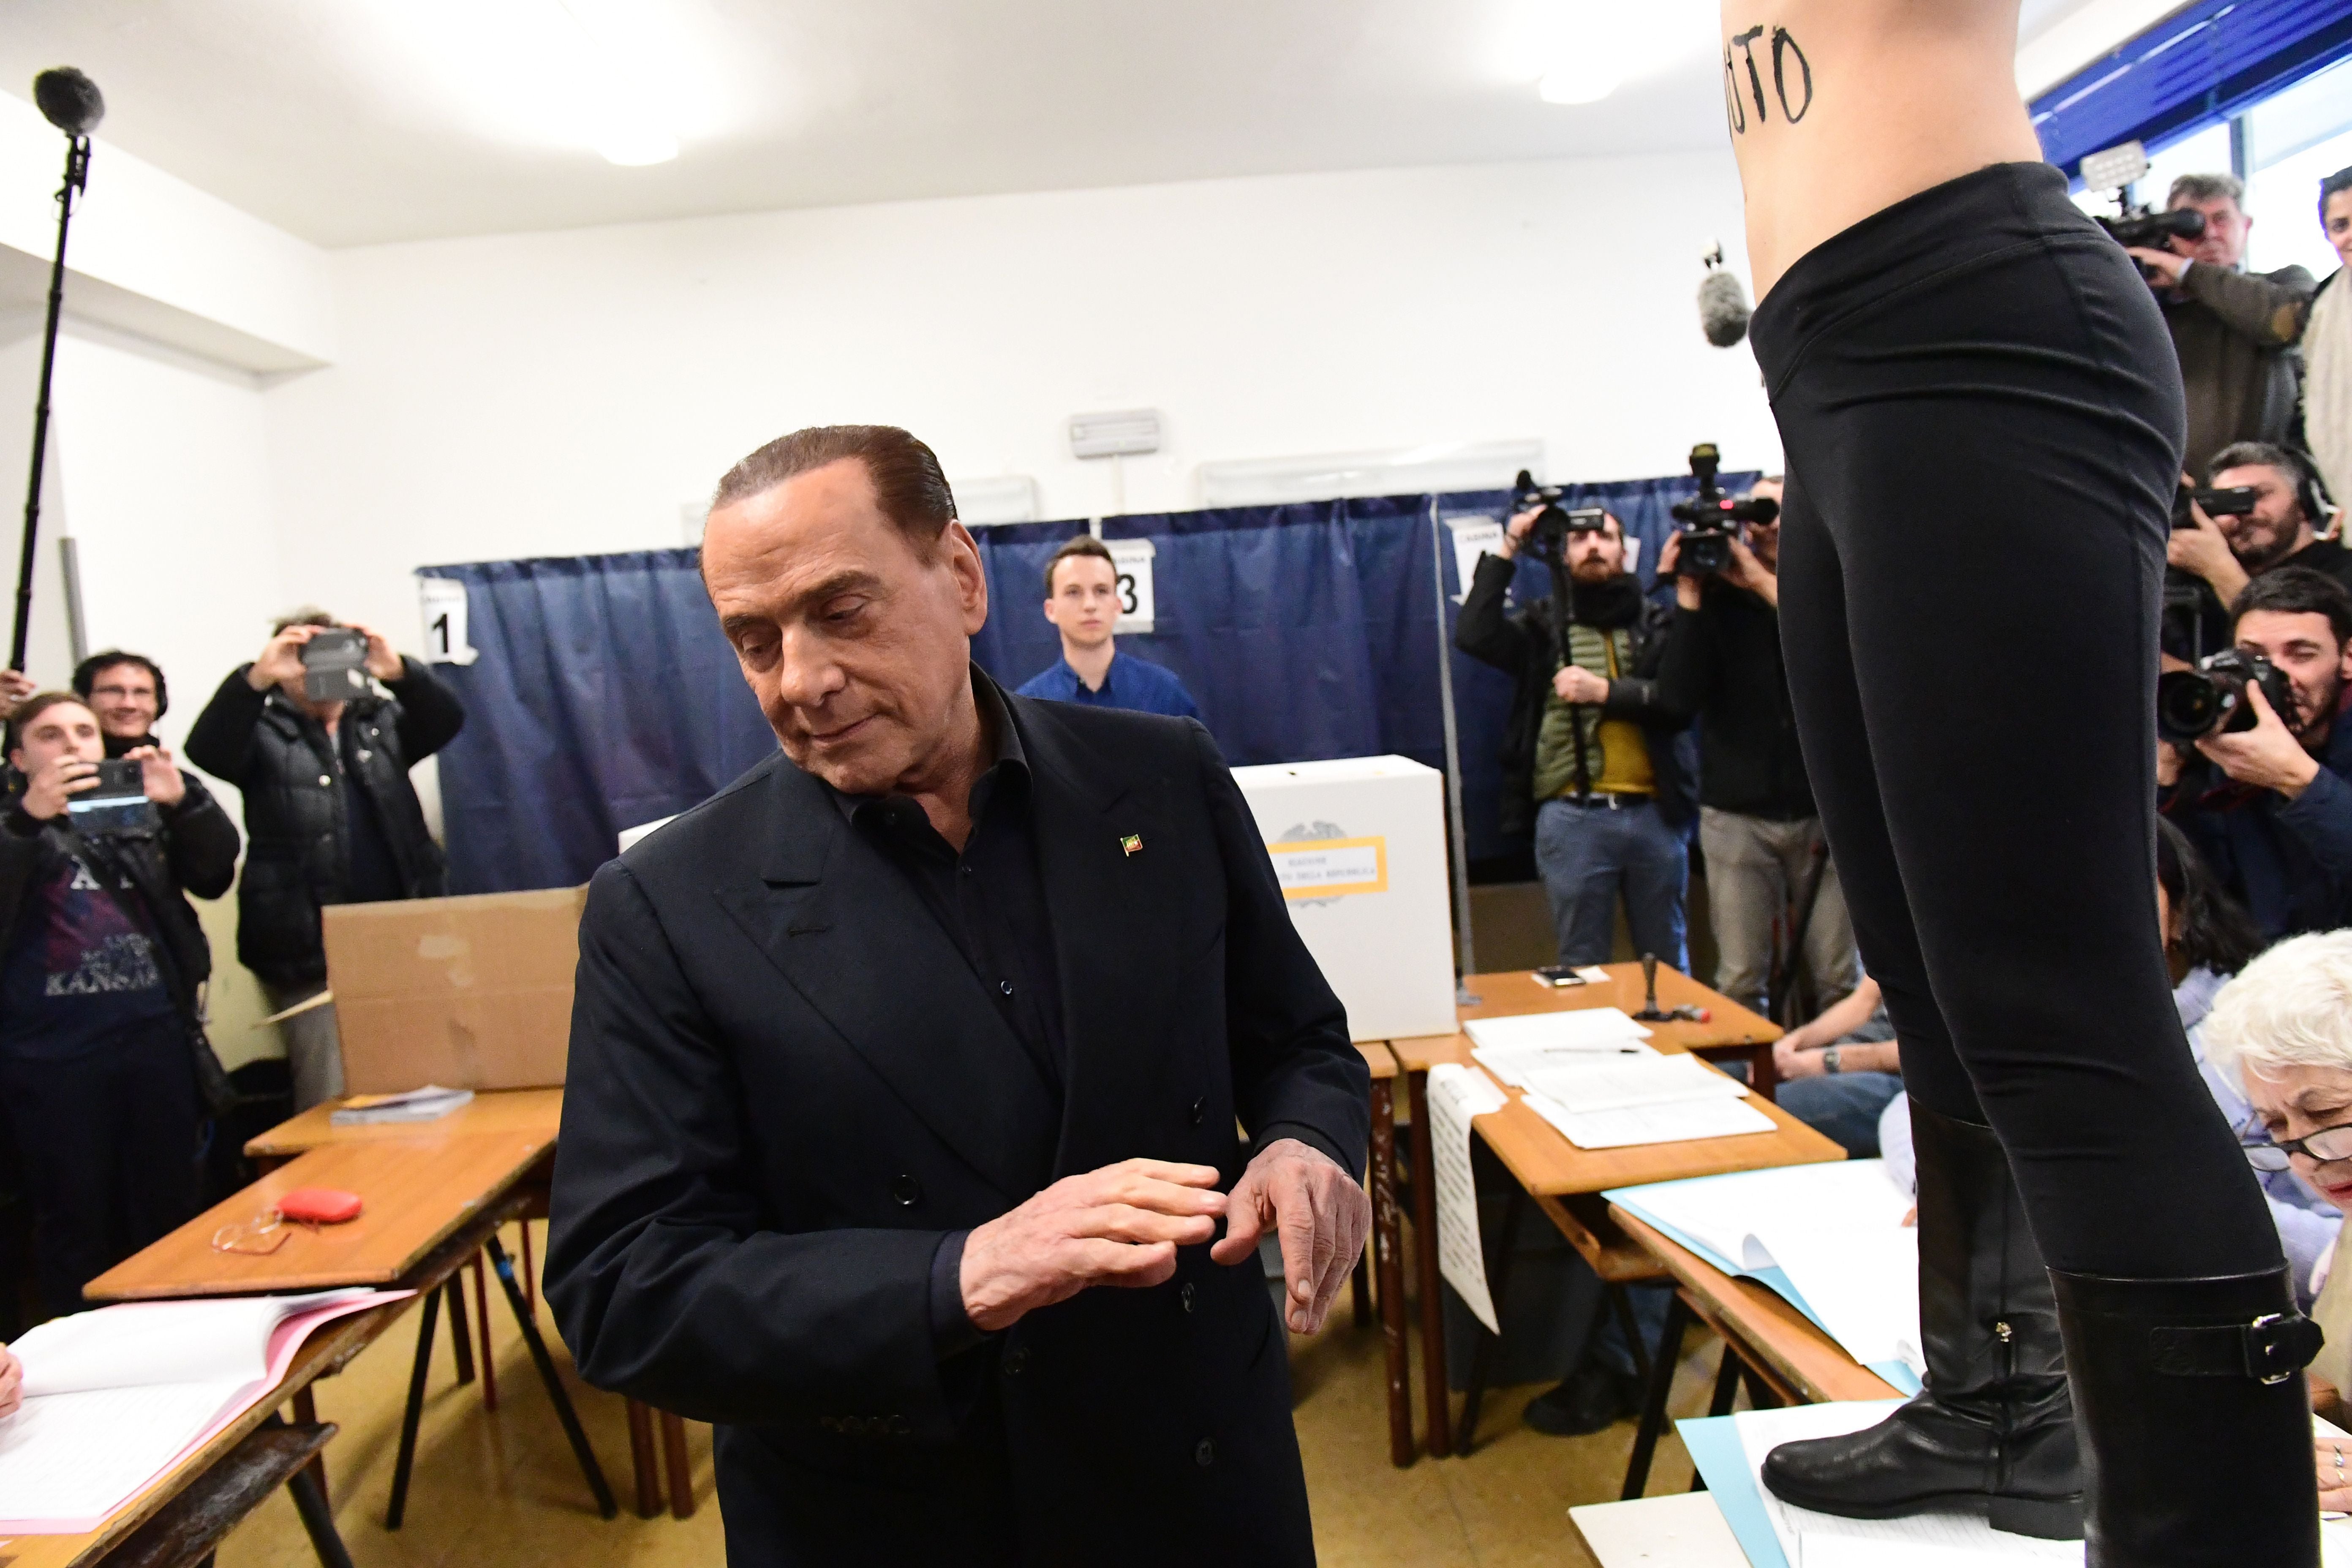 A female activist jumps on a table in front of Silvio Berlusconi to protest topless in 2018